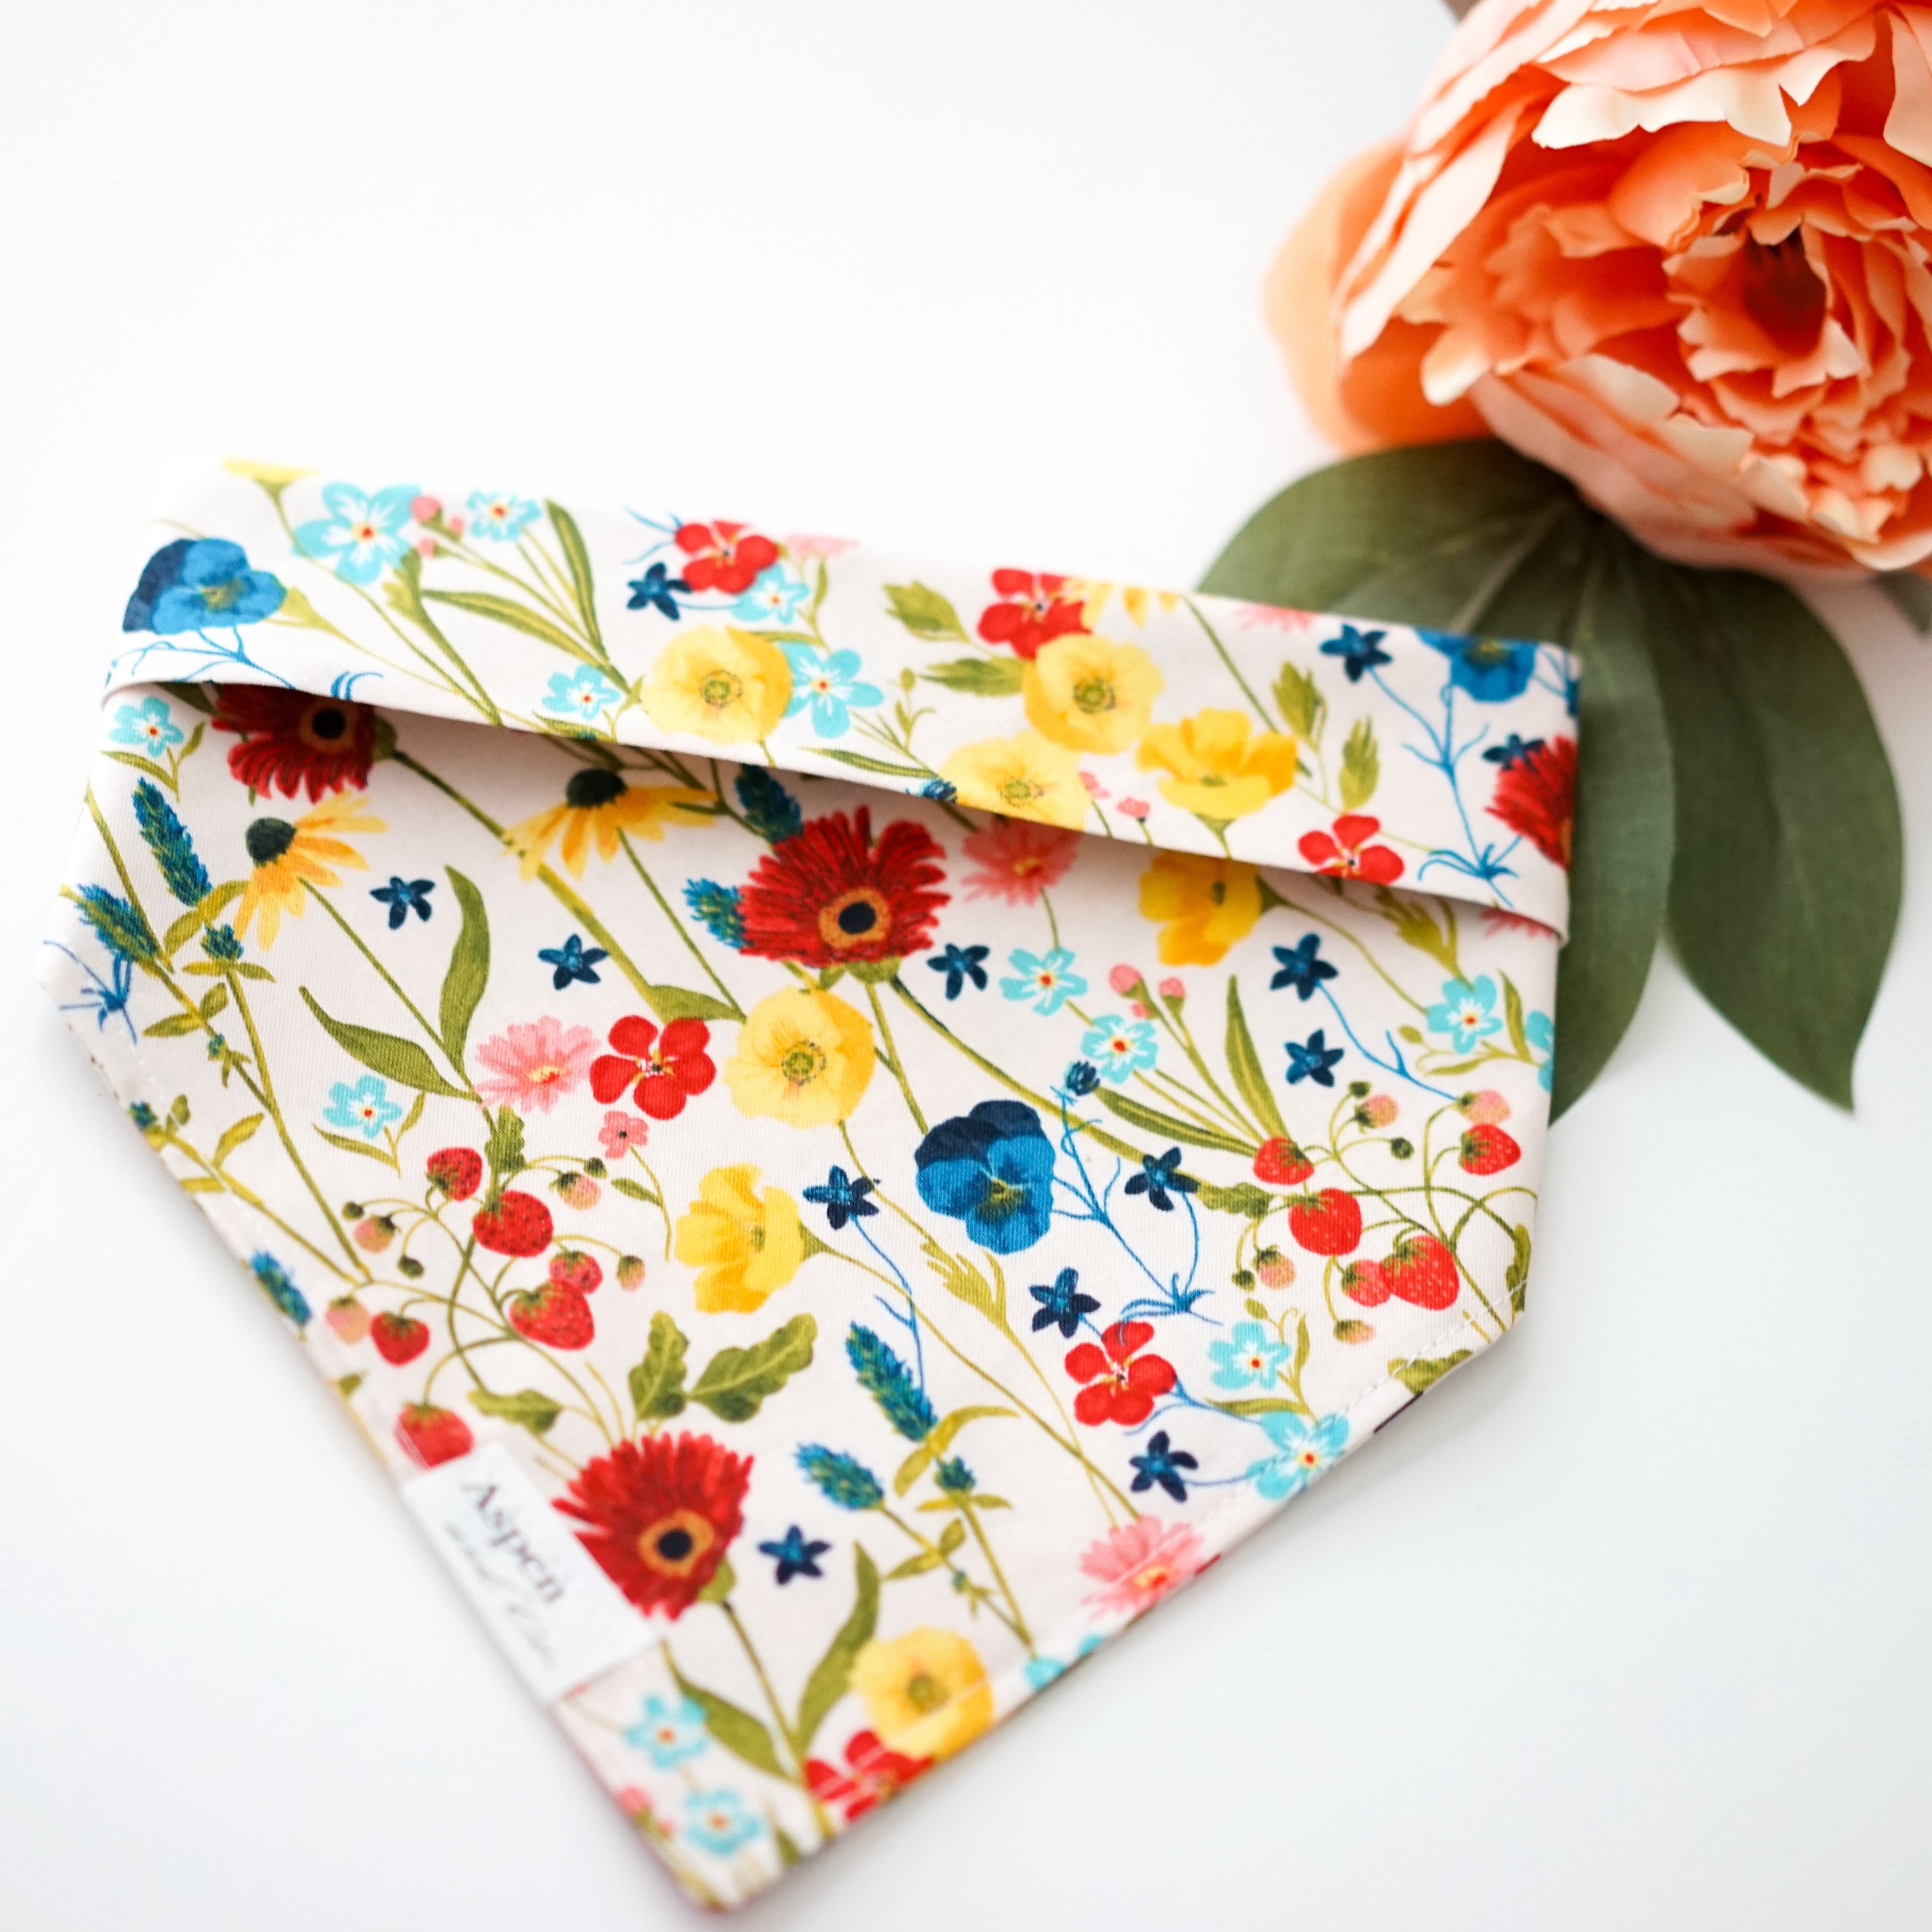 Wildflowers dog bandana by Aspen and Co. Handmade in Southern California featuring beautiful assorted wildflowers, this is a snap on dog bandana.Aspen and Co. offers dog bandanas, puppy bandanas,  dog portraits, dog mom shirts, waterproof bandanas, dog collars, dog birthday bandanas, and more.